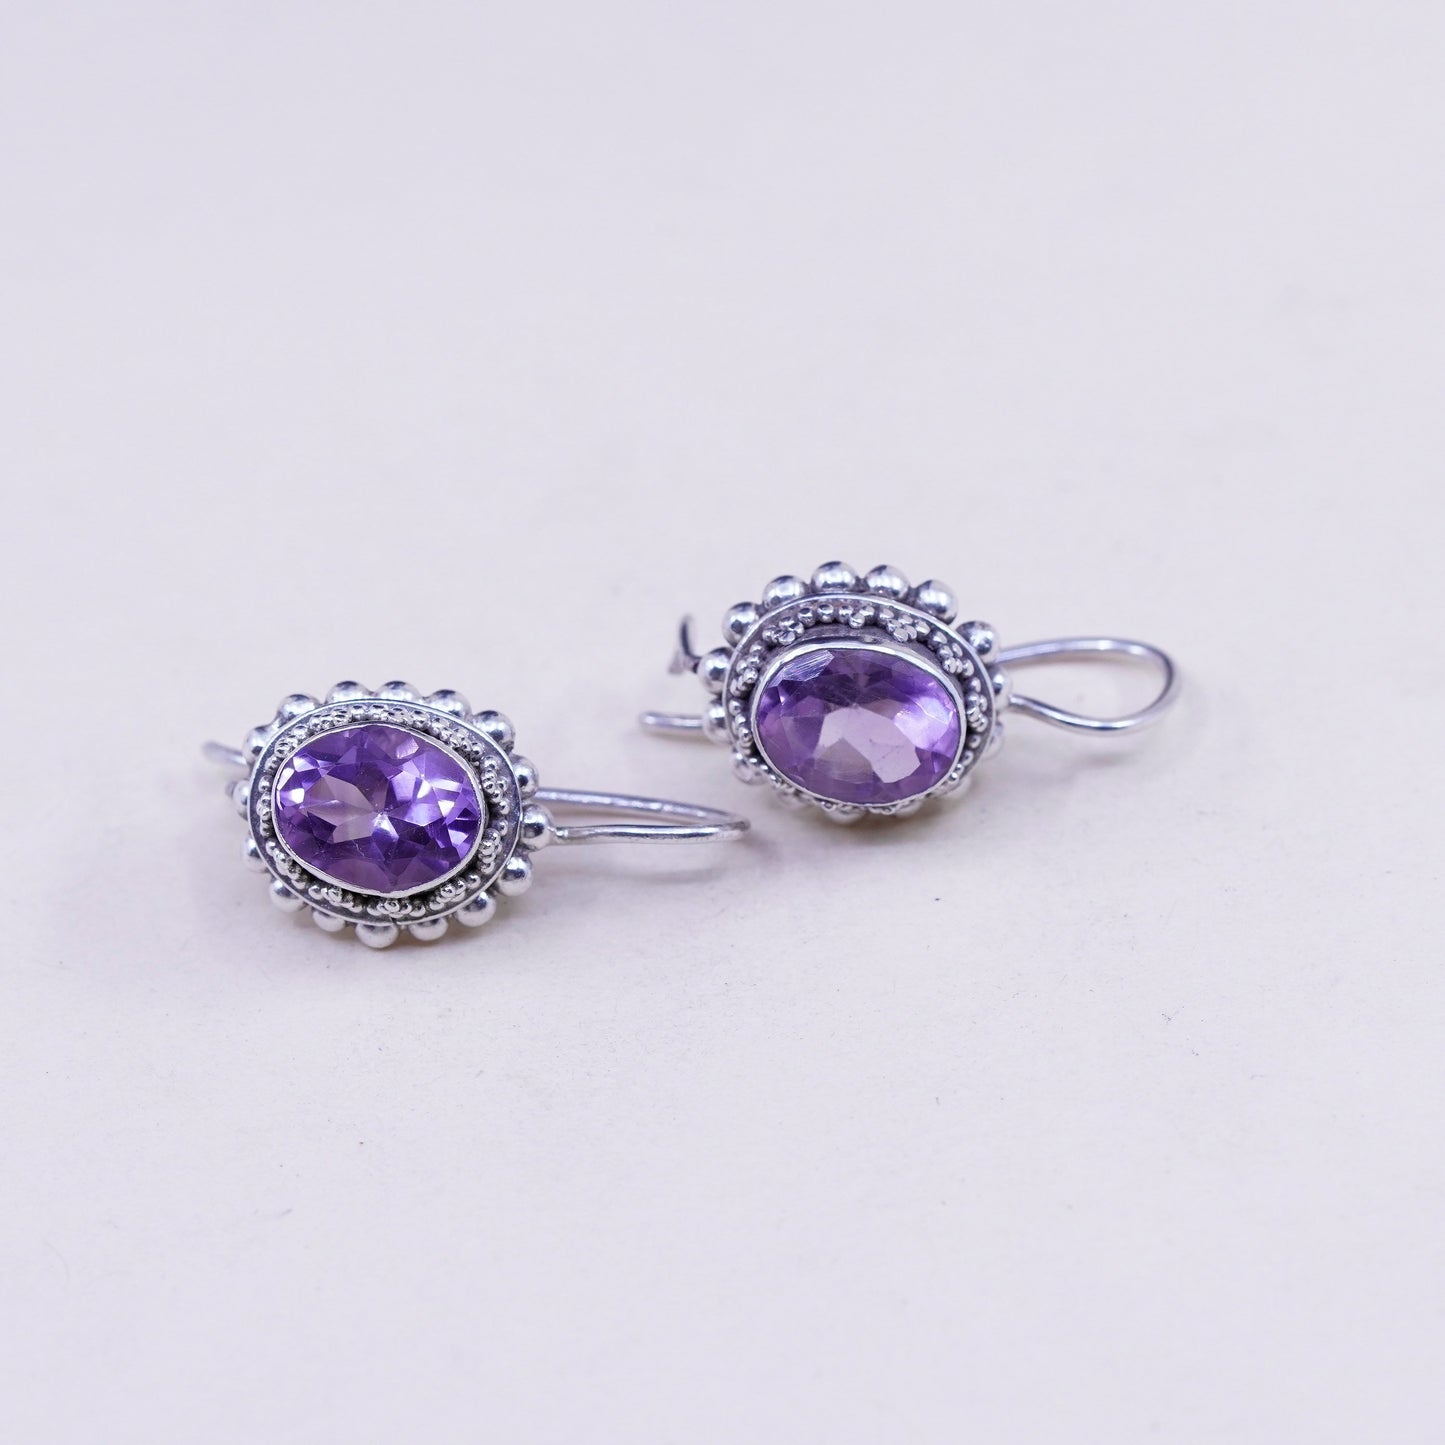 Vintage sterling silver handmade earrings, 925 drops with amethyst and beads